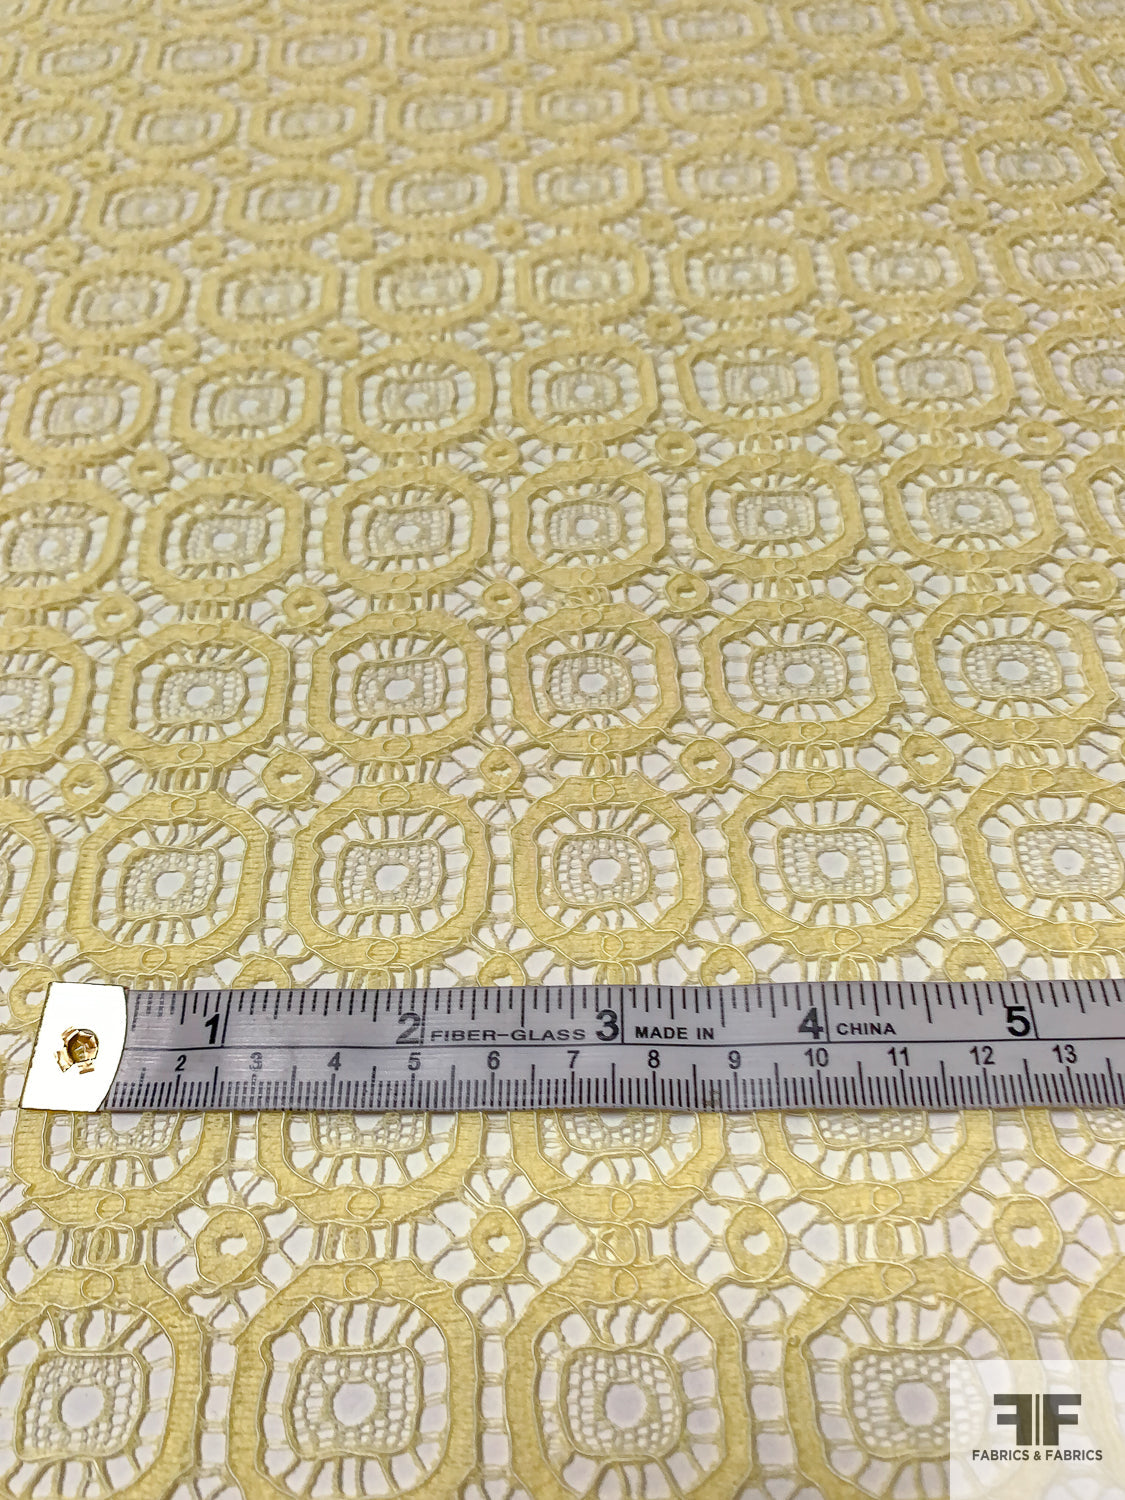 SALE Textured Geometric Lace Fabric 5941 White, by the yard